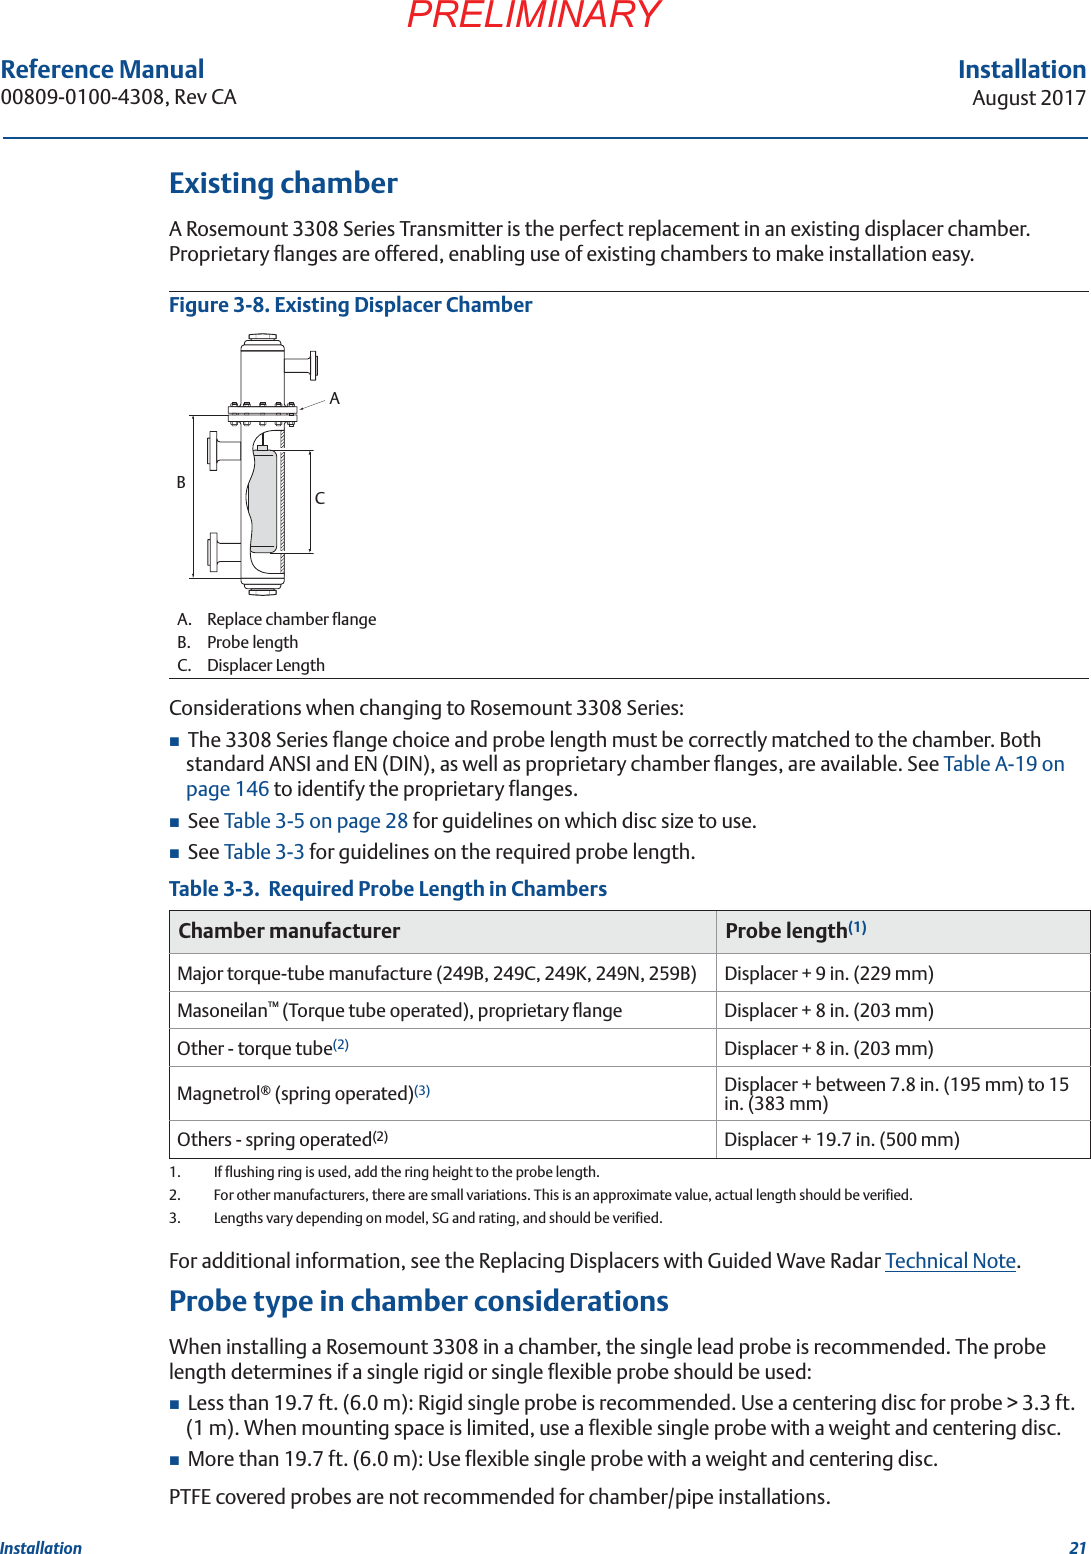 21InstallationAugust 2017InstallationPRELIMINARYReference Manual 00809-0100-4308, Rev CAExisting chamberA Rosemount 3308 Series Transmitter is the perfect replacement in an existing displacer chamber. Proprietary flanges are offered, enabling use of existing chambers to make installation easy.Figure 3-8. Existing Displacer ChamberConsiderations when changing to Rosemount 3308 Series:The 3308 Series flange choice and probe length must be correctly matched to the chamber. Both standard ANSI and EN (DIN), as well as proprietary chamber flanges, are available. See Table A-19 on page 146 to identify the proprietary flanges.See Table 3-5 on page 28 for guidelines on which disc size to use.See Table 3-3 for guidelines on the required probe length.Table 3-3.  Required Probe Length in ChambersFor additional information, see the Replacing Displacers with Guided Wave Radar Technical Note.Probe type in chamber considerationsWhen installing a Rosemount 3308 in a chamber, the single lead probe is recommended. The probe length determines if a single rigid or single flexible probe should be used:Less than 19.7 ft. (6.0 m): Rigid single probe is recommended. Use a centering disc for probe &gt; 3.3 ft. (1 m). When mounting space is limited, use a flexible single probe with a weight and centering disc.More than 19.7 ft. (6.0 m): Use flexible single probe with a weight and centering disc.PTFE covered probes are not recommended for chamber/pipe installations.A. Replace chamber flangeB. Probe lengthC. Displacer LengthChamber manufacturer Probe length(1)1.  If flushing ring is used, add the ring height to the probe length.Major torque-tube manufacture (249B, 249C, 249K, 249N, 259B) Displacer + 9 in. (229 mm)Masoneilan™ (Torque tube operated), proprietary flange Displacer + 8 in. (203 mm)Other - torque tube(2)2.  For other manufacturers, there are small variations. This is an approximate value, actual length should be verified.Displacer + 8 in. (203 mm)Magnetrol® (spring operated)(3)3.  Lengths vary depending on model, SG and rating, and should be verified.Displacer + between 7.8 in. (195 mm) to 15 in. (383 mm)Others - spring operated(2) Displacer + 19.7 in. (500 mm)ACB